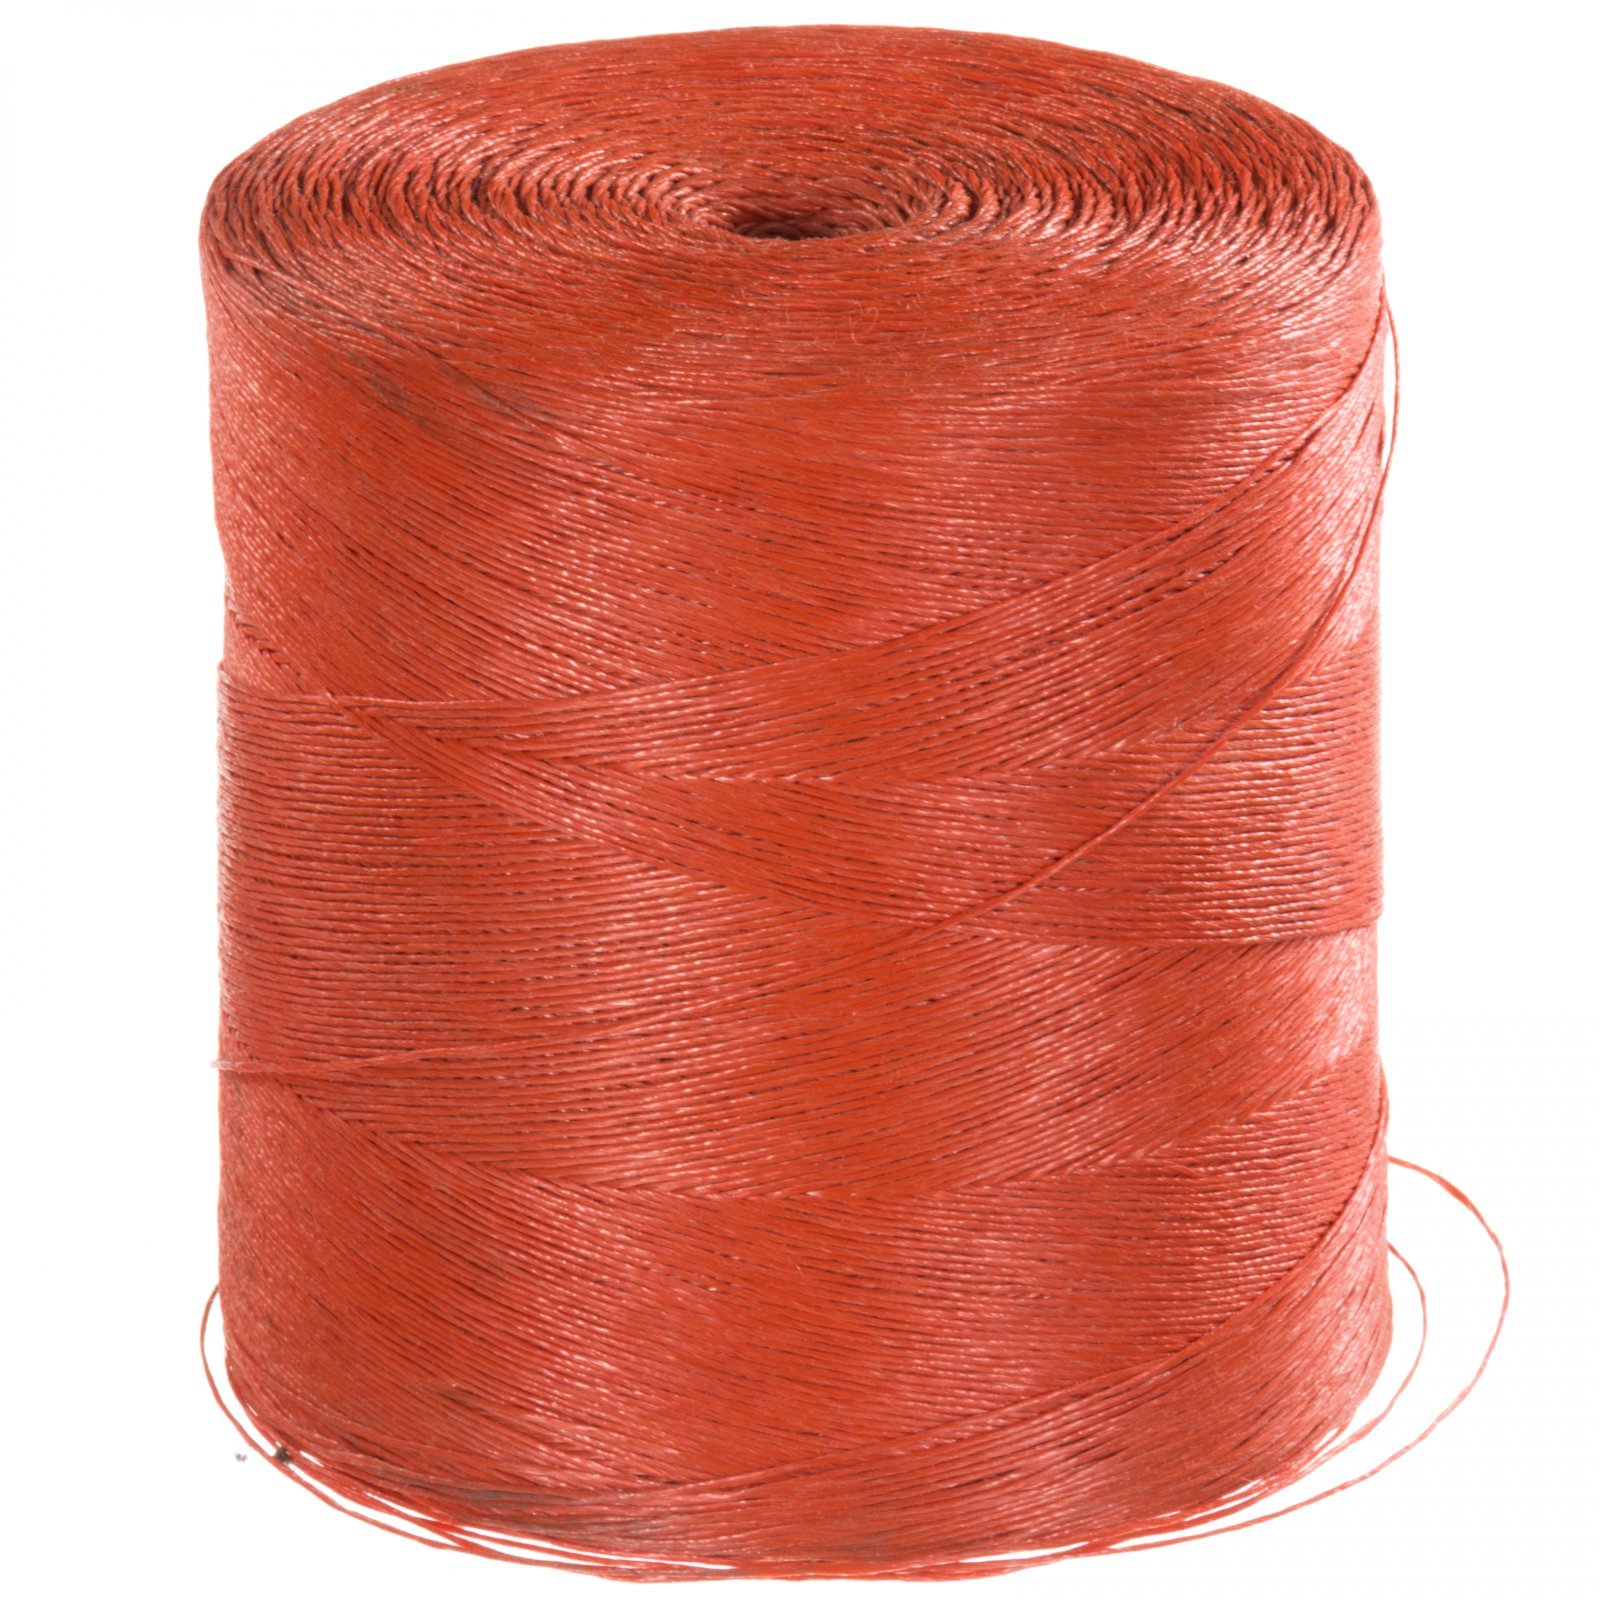 Polypropylene Baler Twine ropes - Lowest prices, free shipping